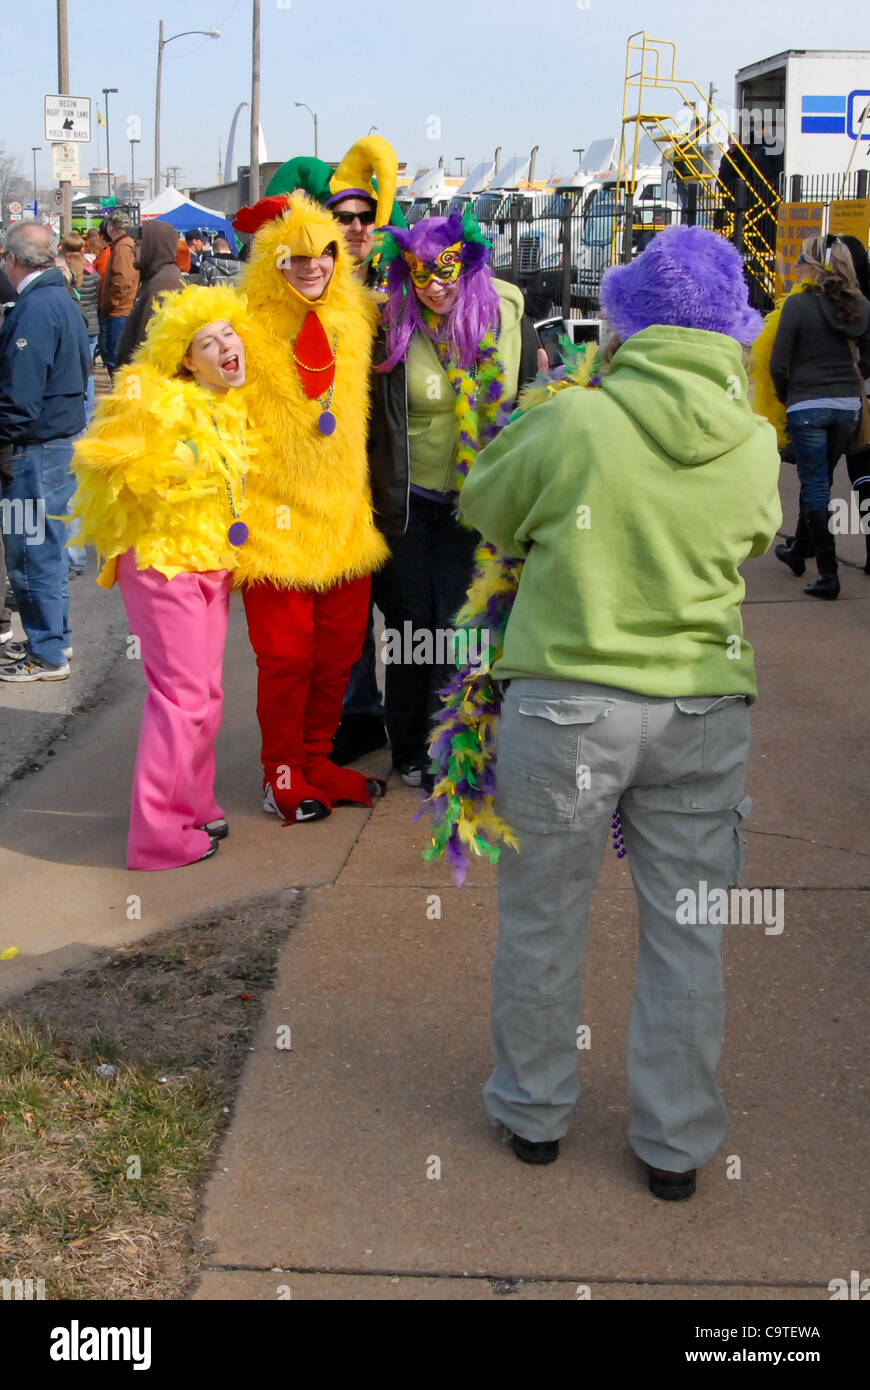 Feb. 18, 2012 - Saint Louis, Missouri, U.S - Two strangers stop to have their picture taken with Ian Starr and Becky Everding in their chicken costumes.  Ian and Becky were big hits with the parade watchers during the 2012 Mardi Gras parade and festival at the Soulard District in St. Louis, MO. (Cre Stock Photo